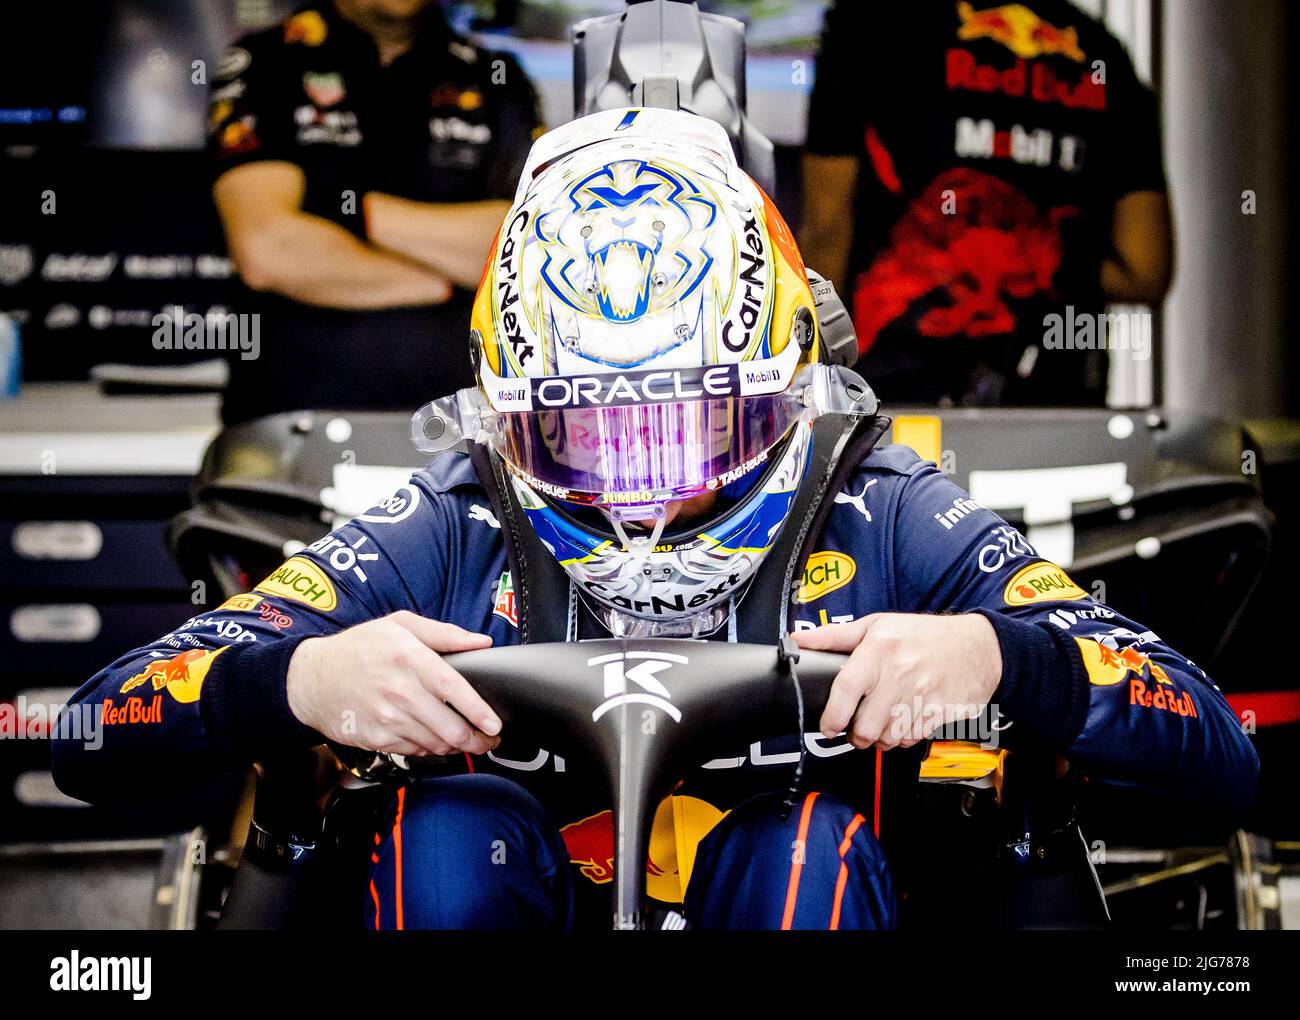 SPIELBERG, Austria - 08/07/2022,  Max Verstappen (1) with the Oracle Red Bull Racing RB18 Honda in the pit box during practice 1 ahead of the F1 Grand Prix of Austria at the Red Bull Ring on July 8, 2022 in Spielberg, Austria. ANP SEM VAN DER WAL Credit: ANP/Alamy Live News Stock Photo